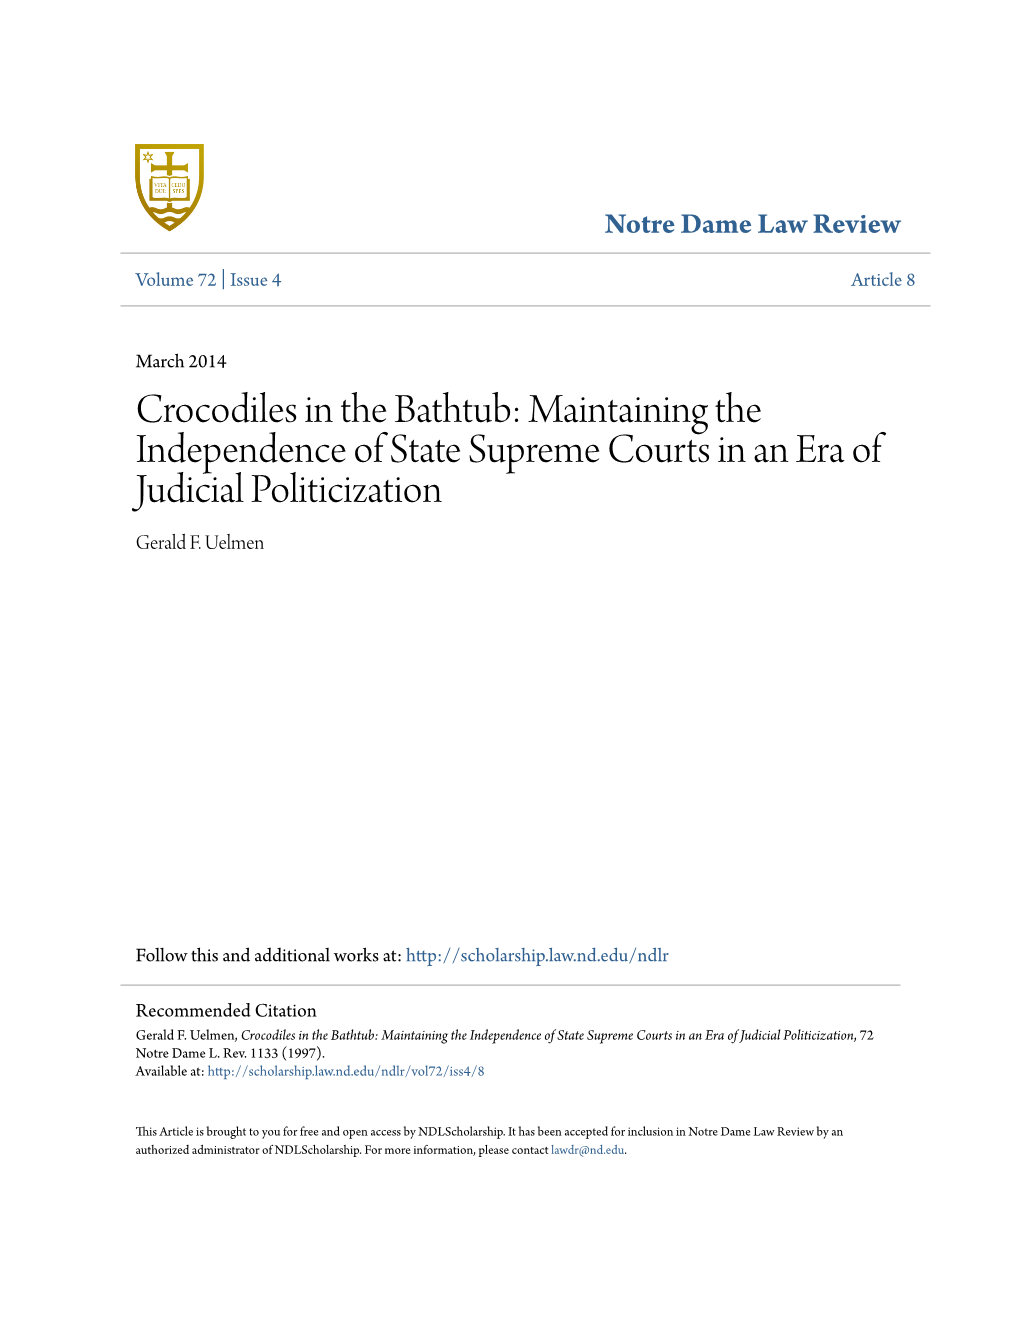 Maintaining the Independence of State Supreme Courts in an Era of Judicial Politicization Gerald F